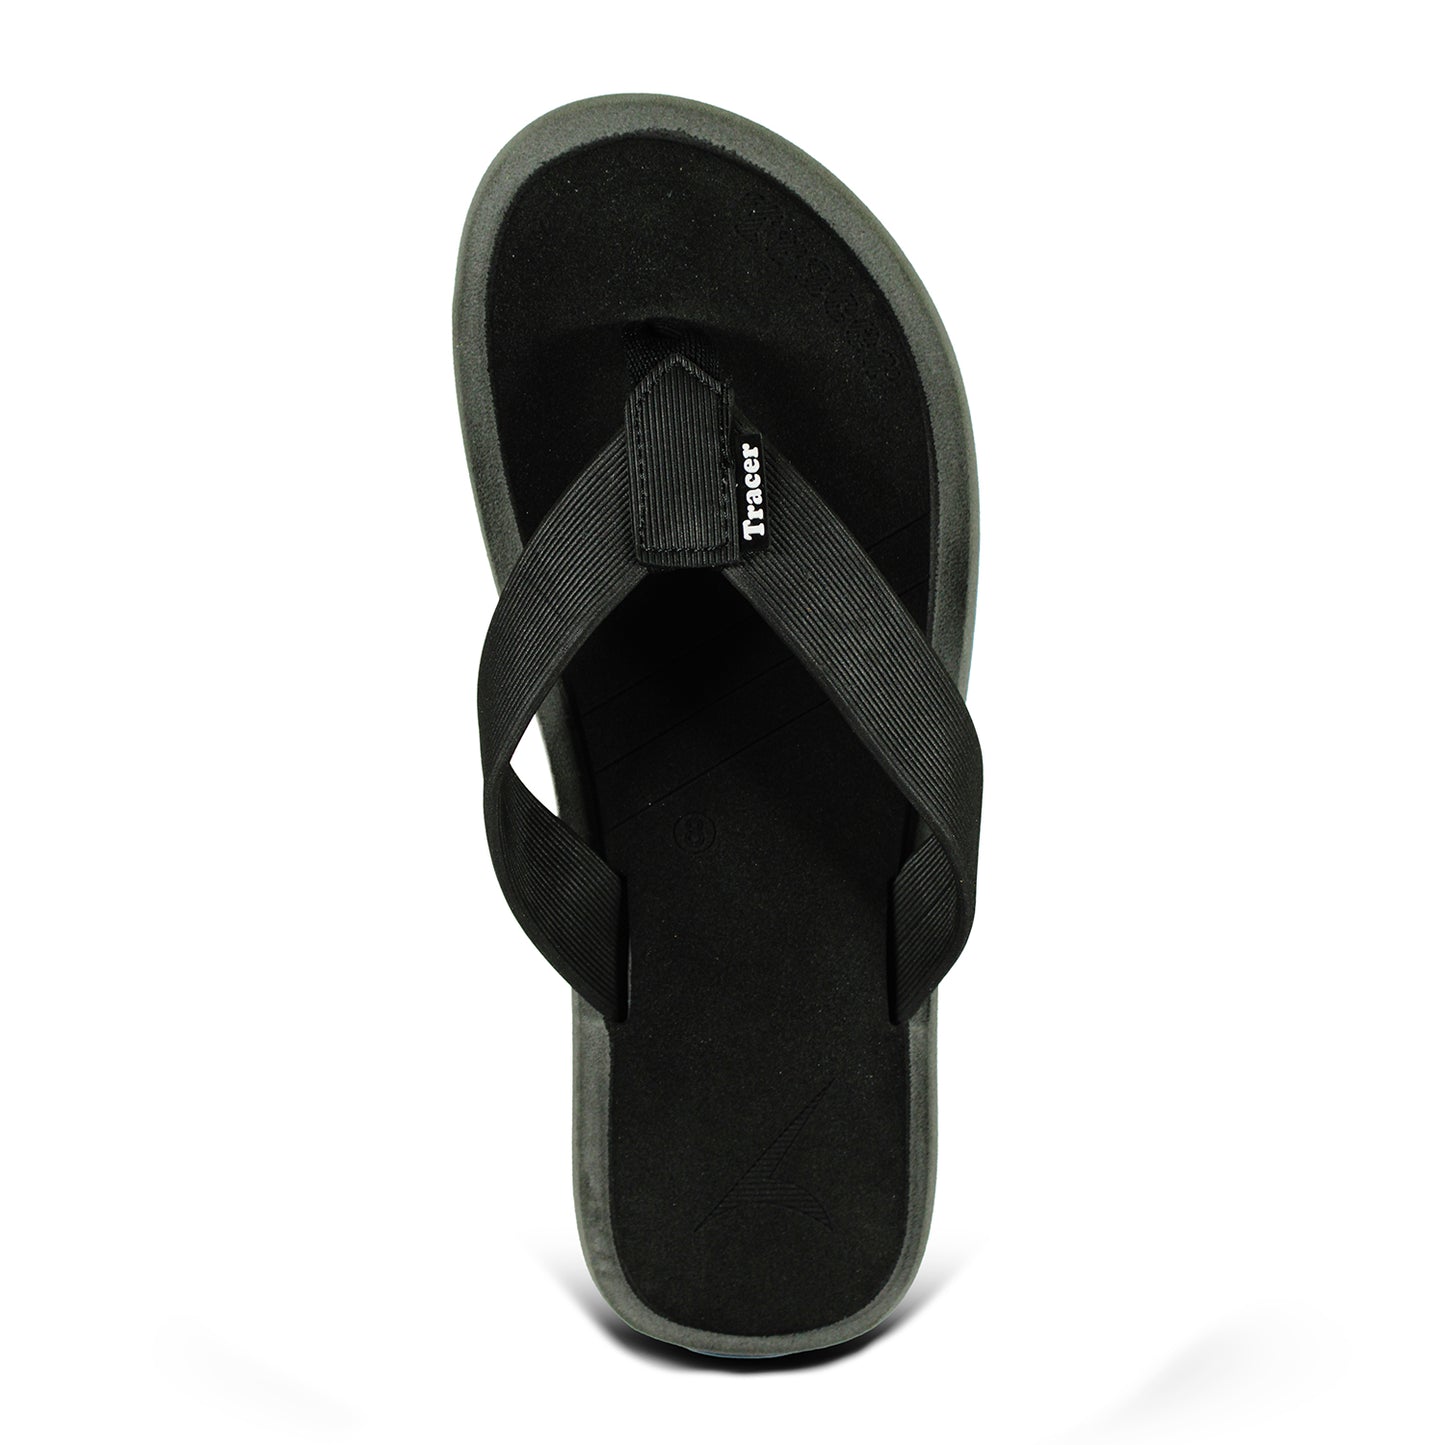 Tracer Slippers| Black | Men's Collection